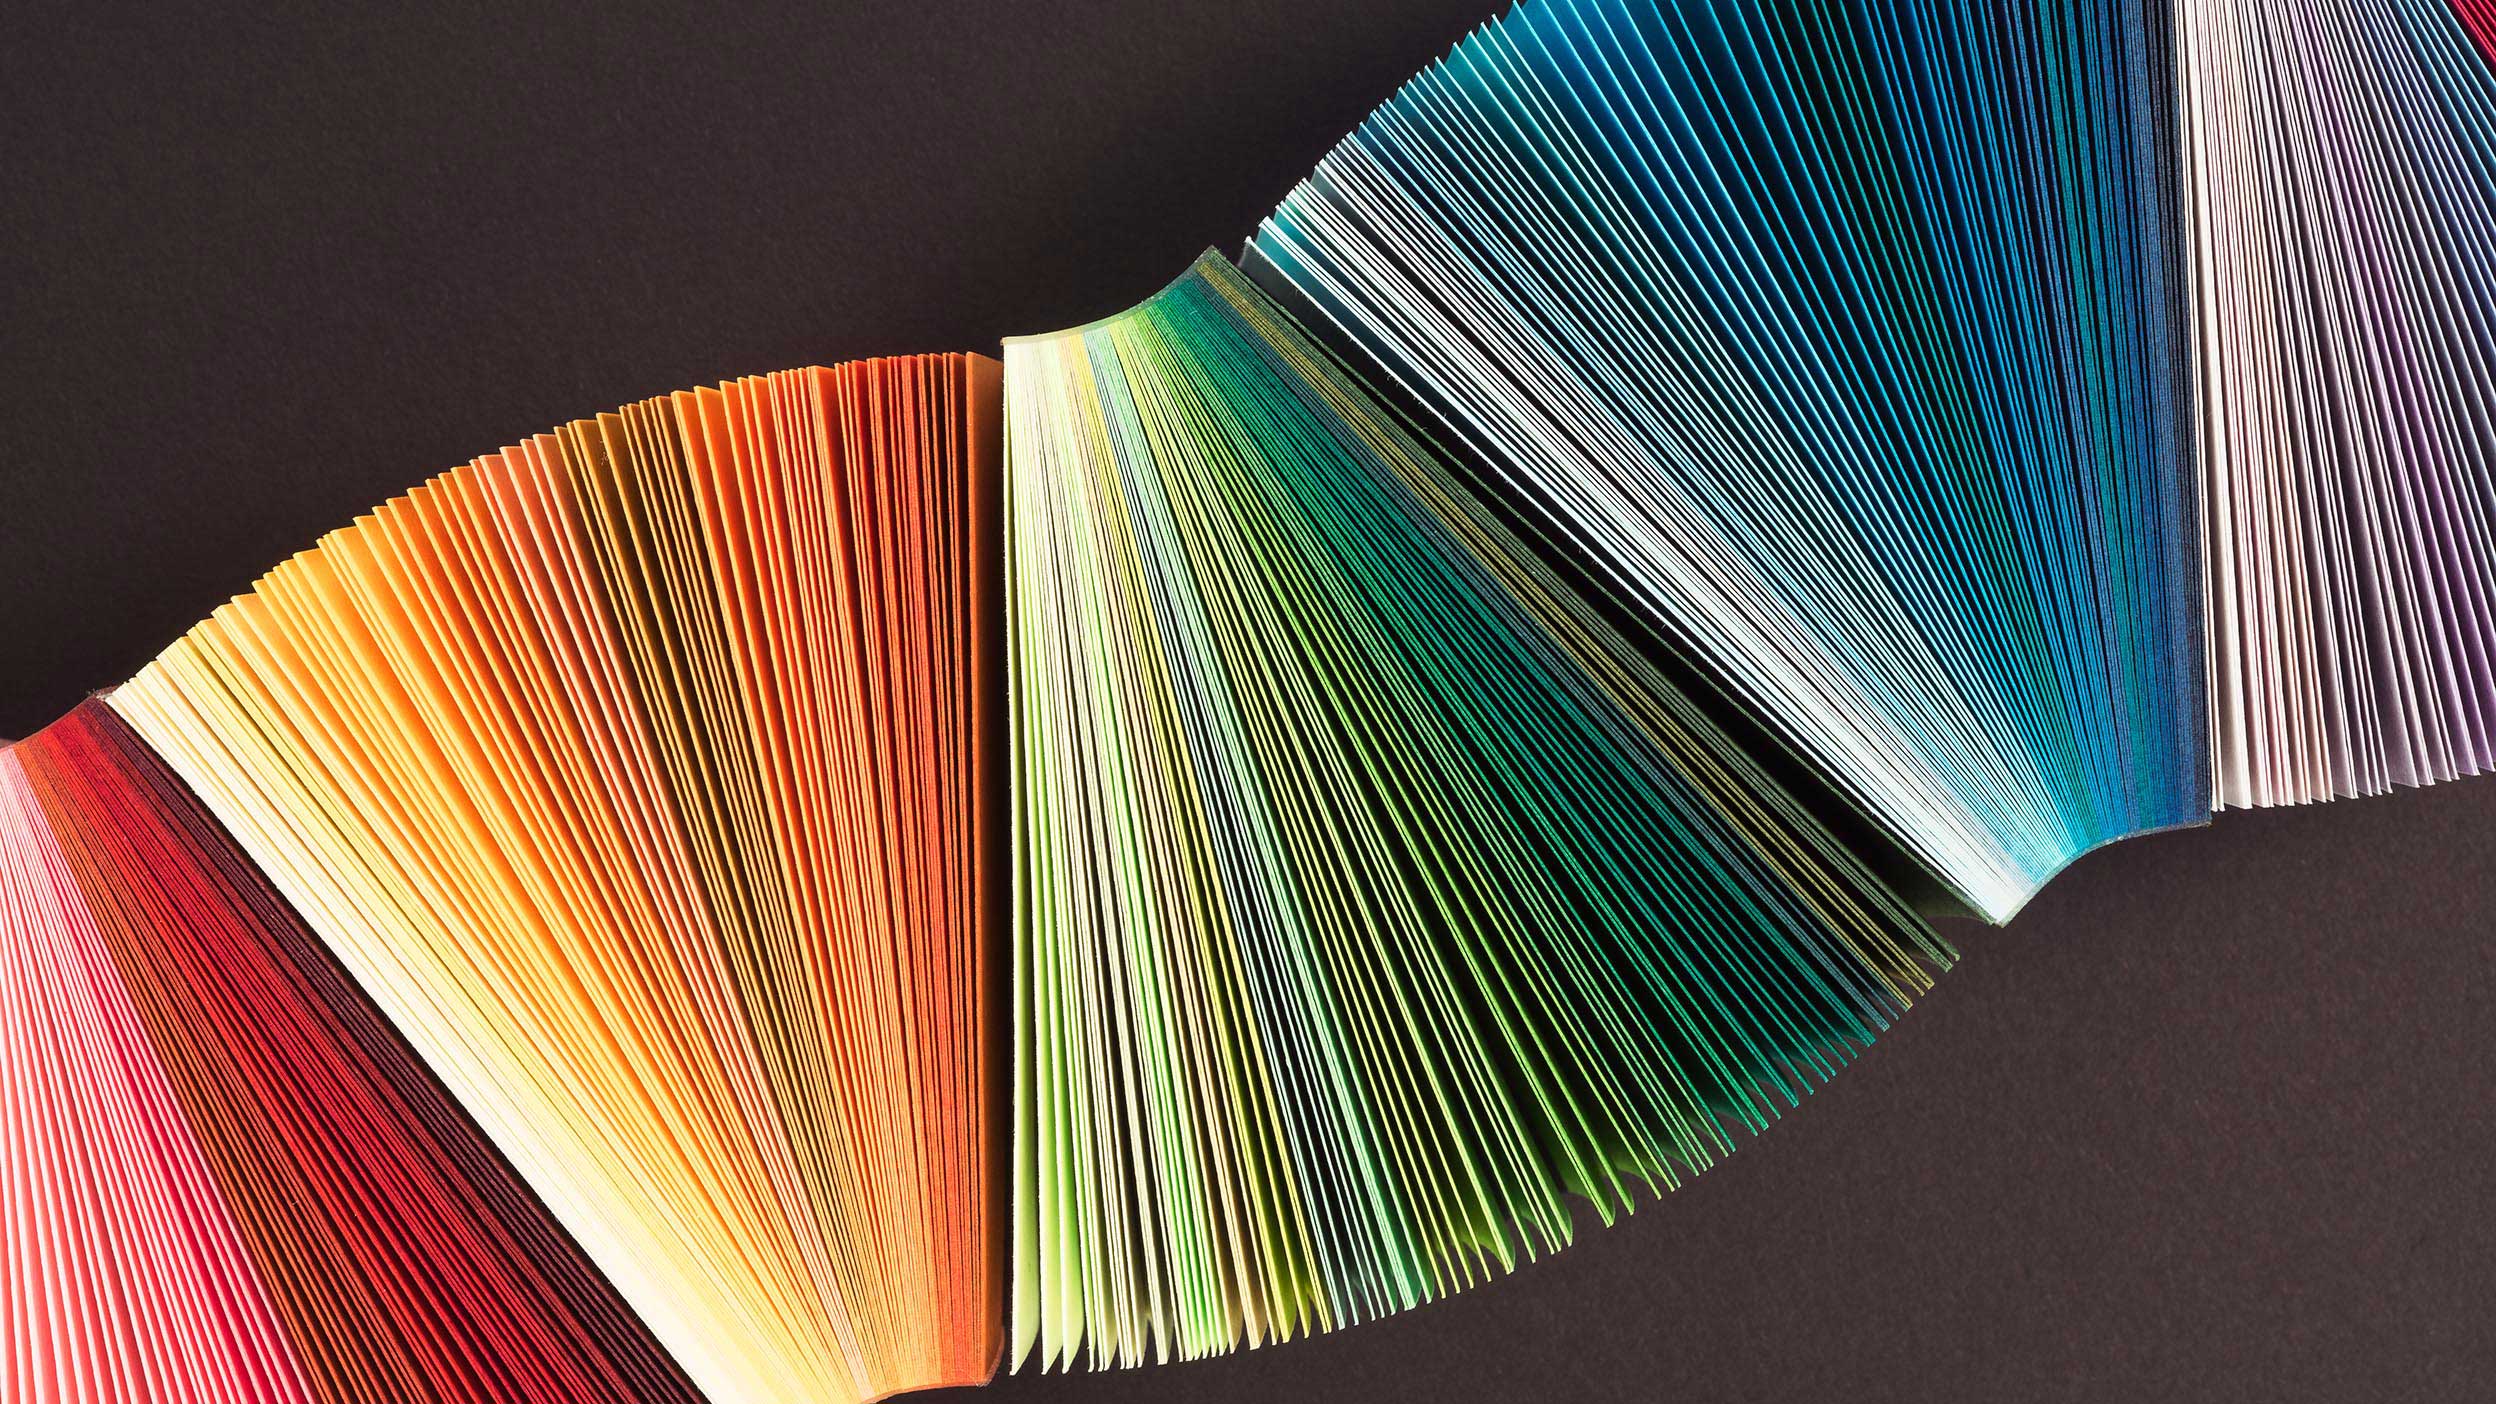 Opened colourful books from above before a brown background